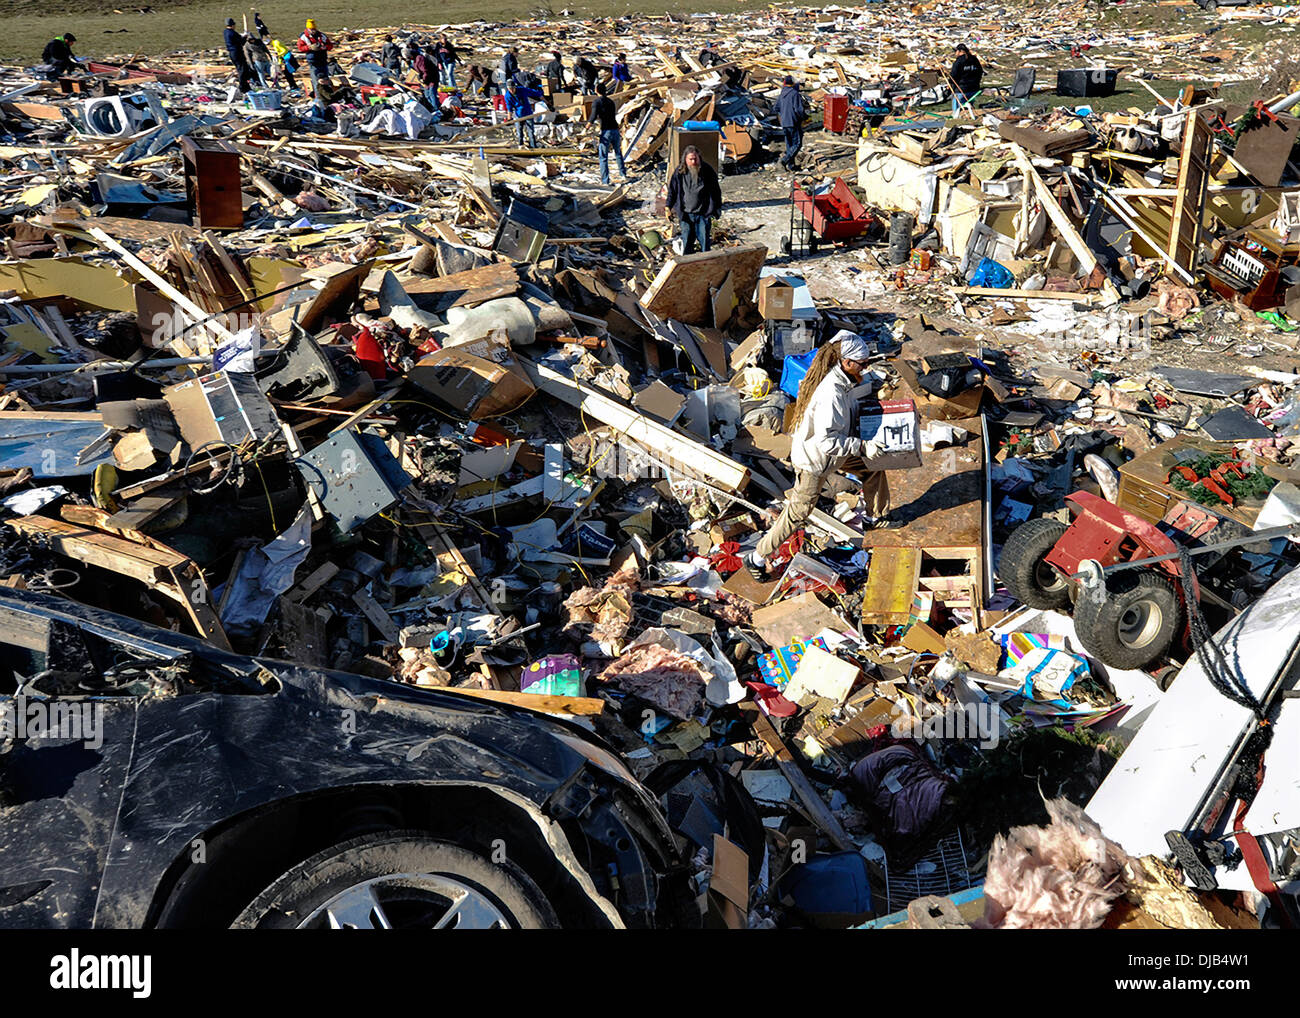 Residents recover items from their homes destroyed by an EF-4 tornado November 19, 2013 in Washington, IL. The tornado left a path of destruction that stretched for more than 46 miles and damaged fourteen-hundred homes. Stock Photo